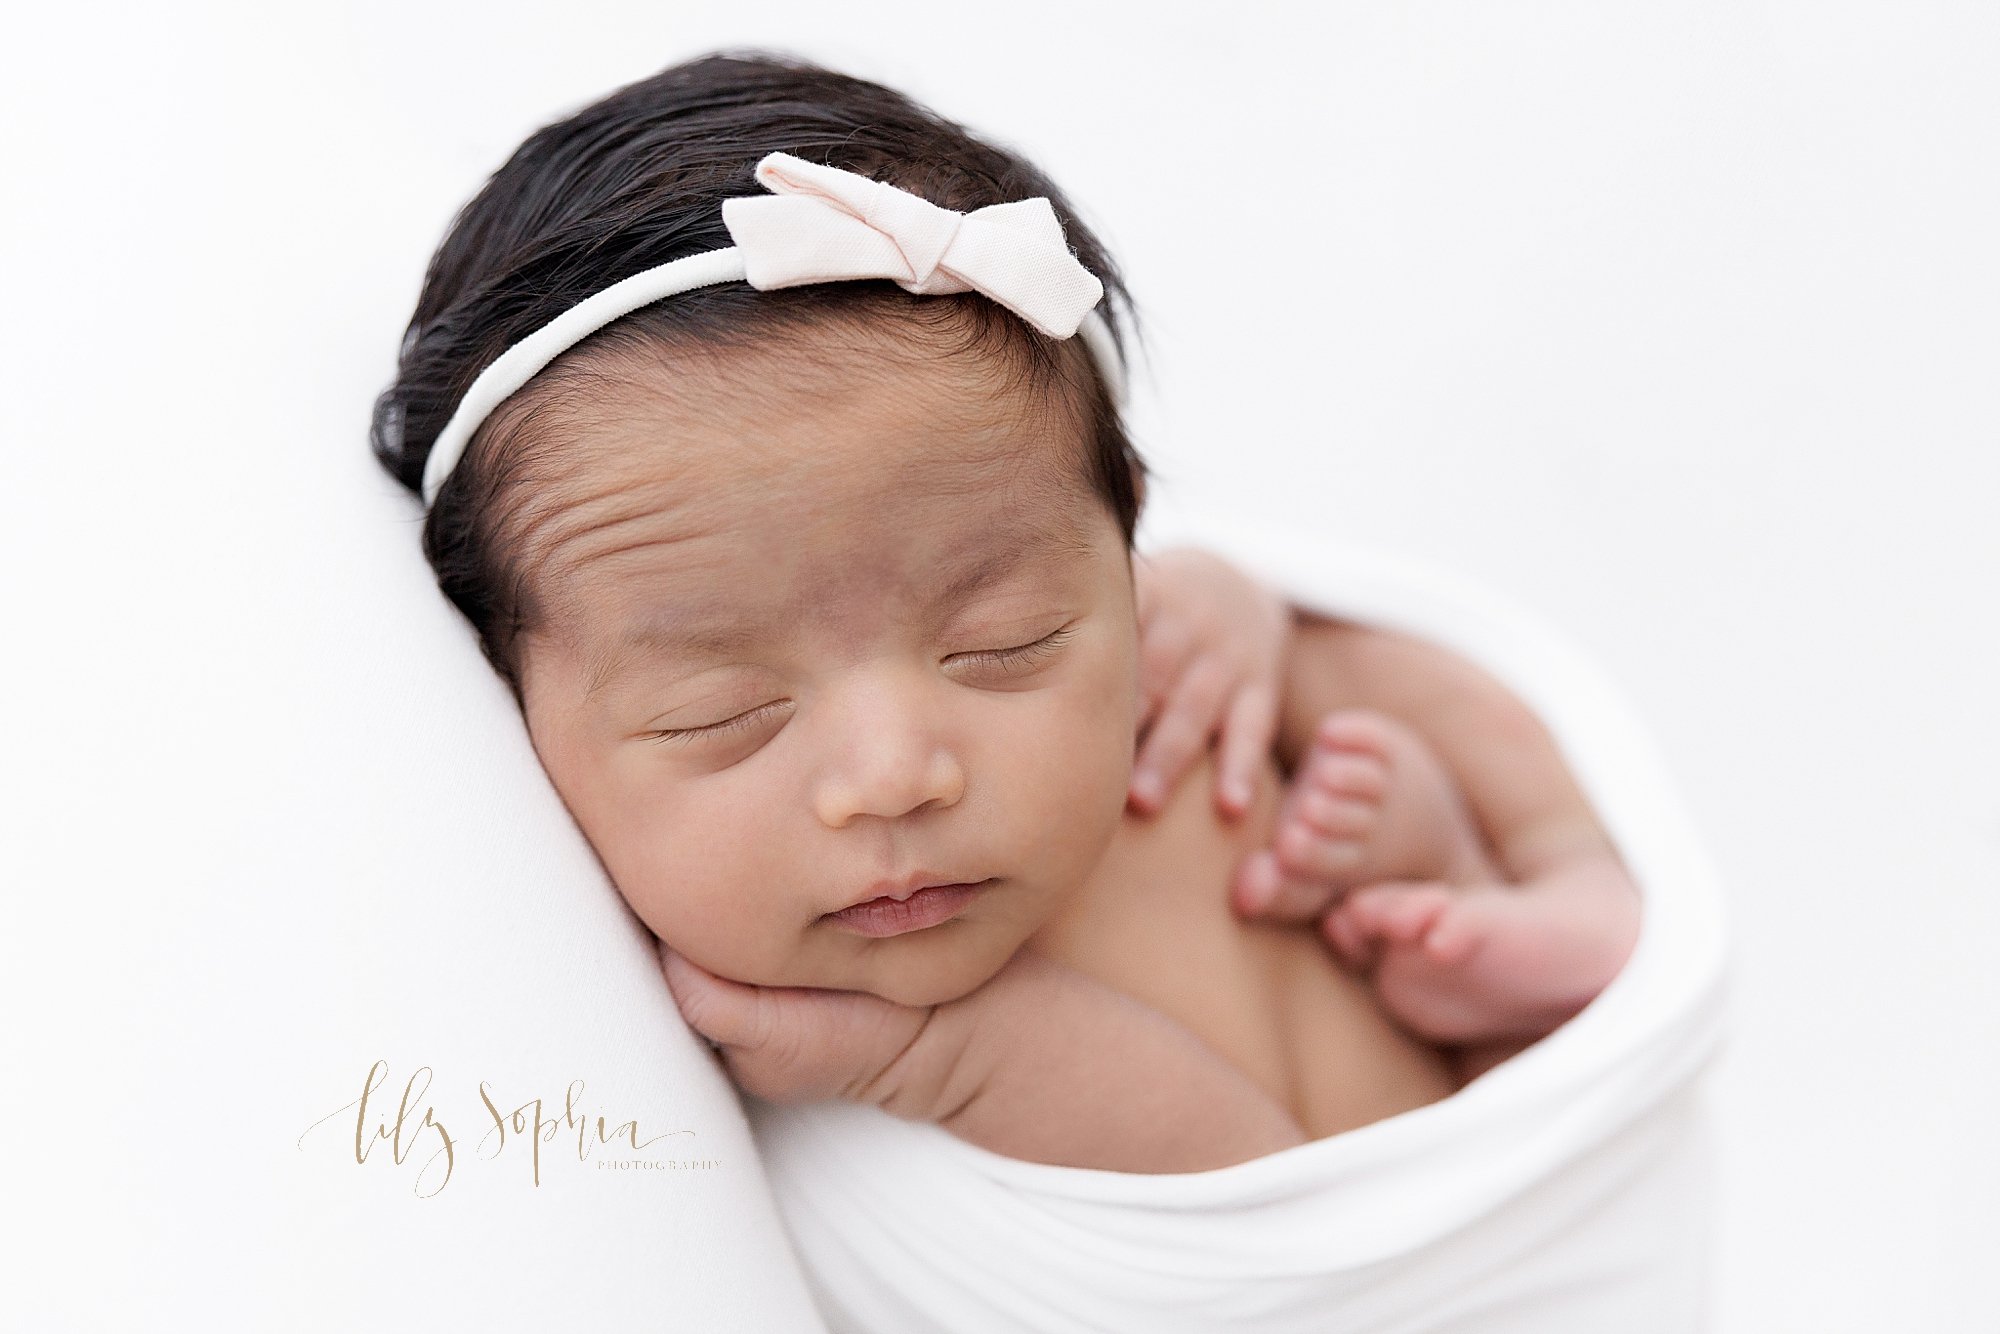  Newborn portrait of a newborn Indian girl wearing a bow headband in her jet black hair as she dreams and raises her eyebrows while cradled in a stretchy swaddle taken in natural light near Roswell in Atlanta in a photography studio. 